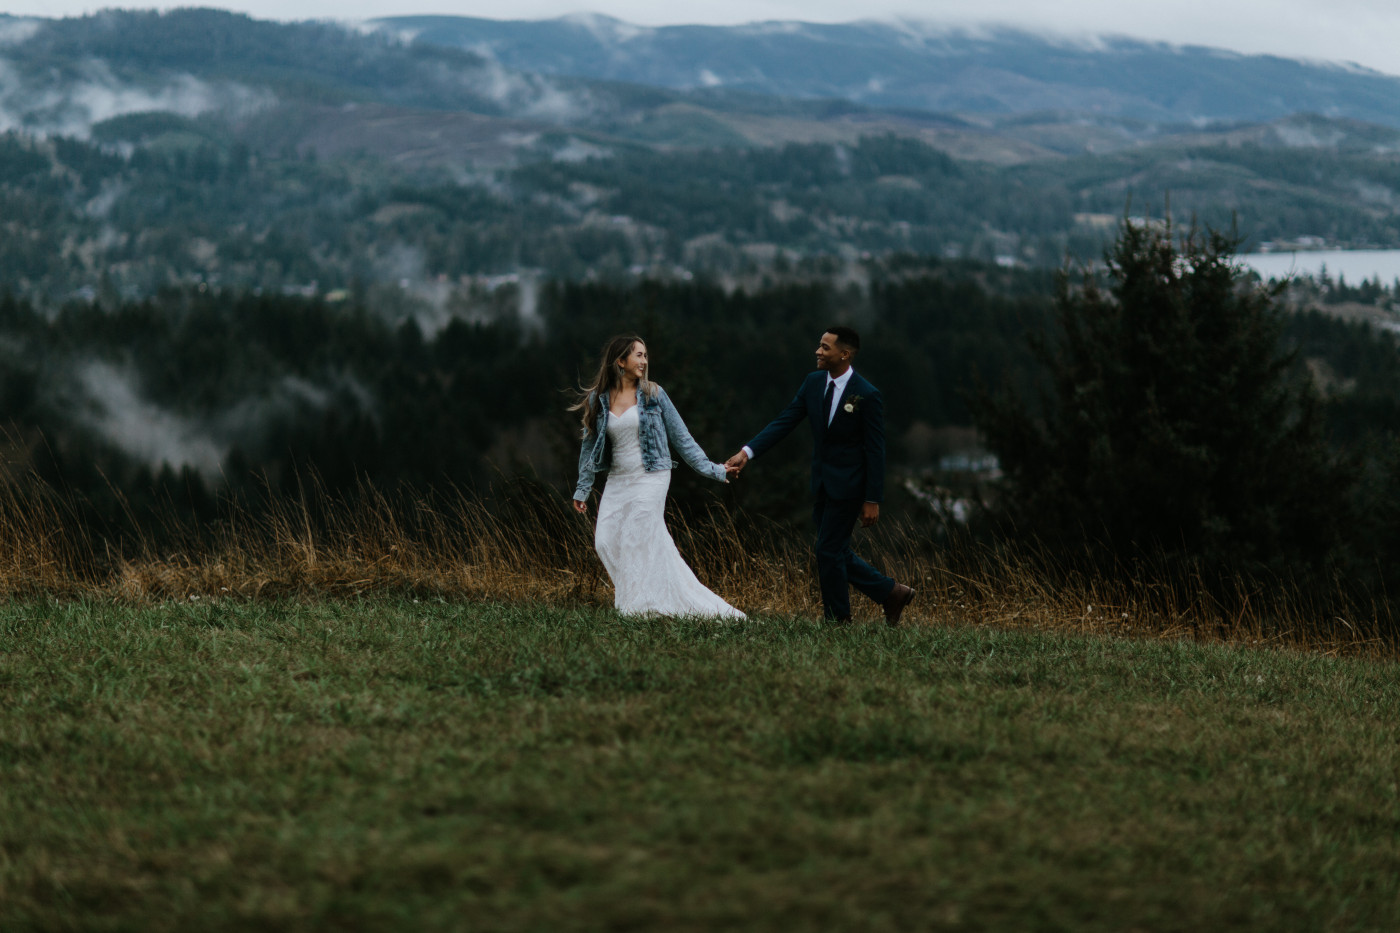 Ariana and Deandre walk hand in hand. Elopement photography at Mount Hood by Sienna Plus Josh.